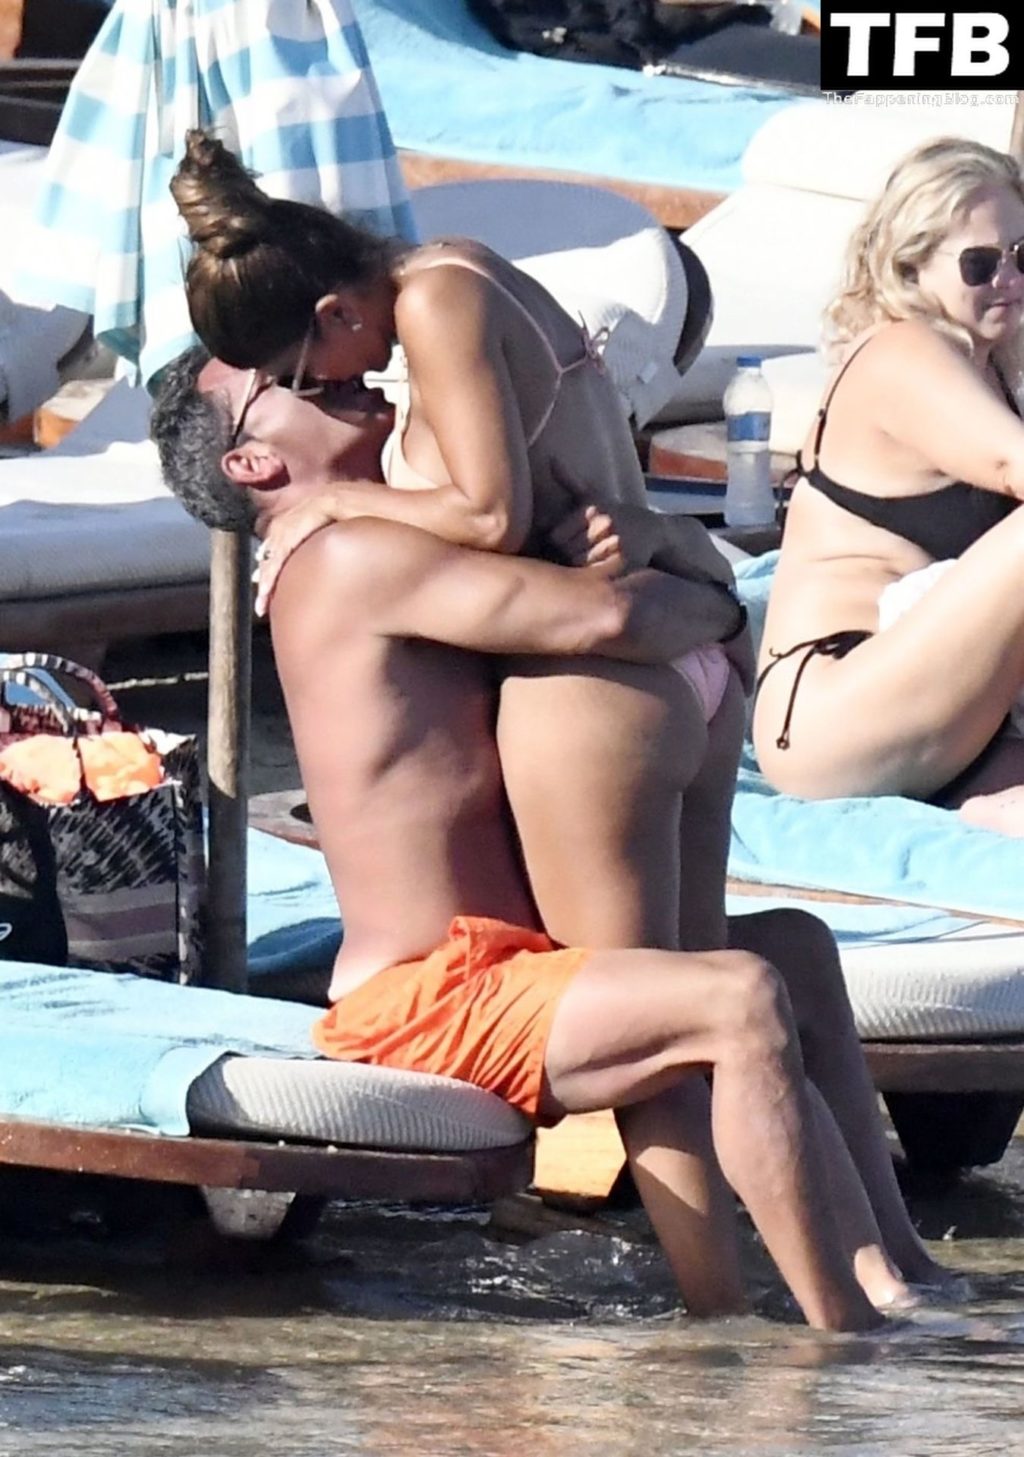 Teresa Giudice And Luis Ruelas Put On A Steamy Display While On Their Honeymoon In Mykonos 88 